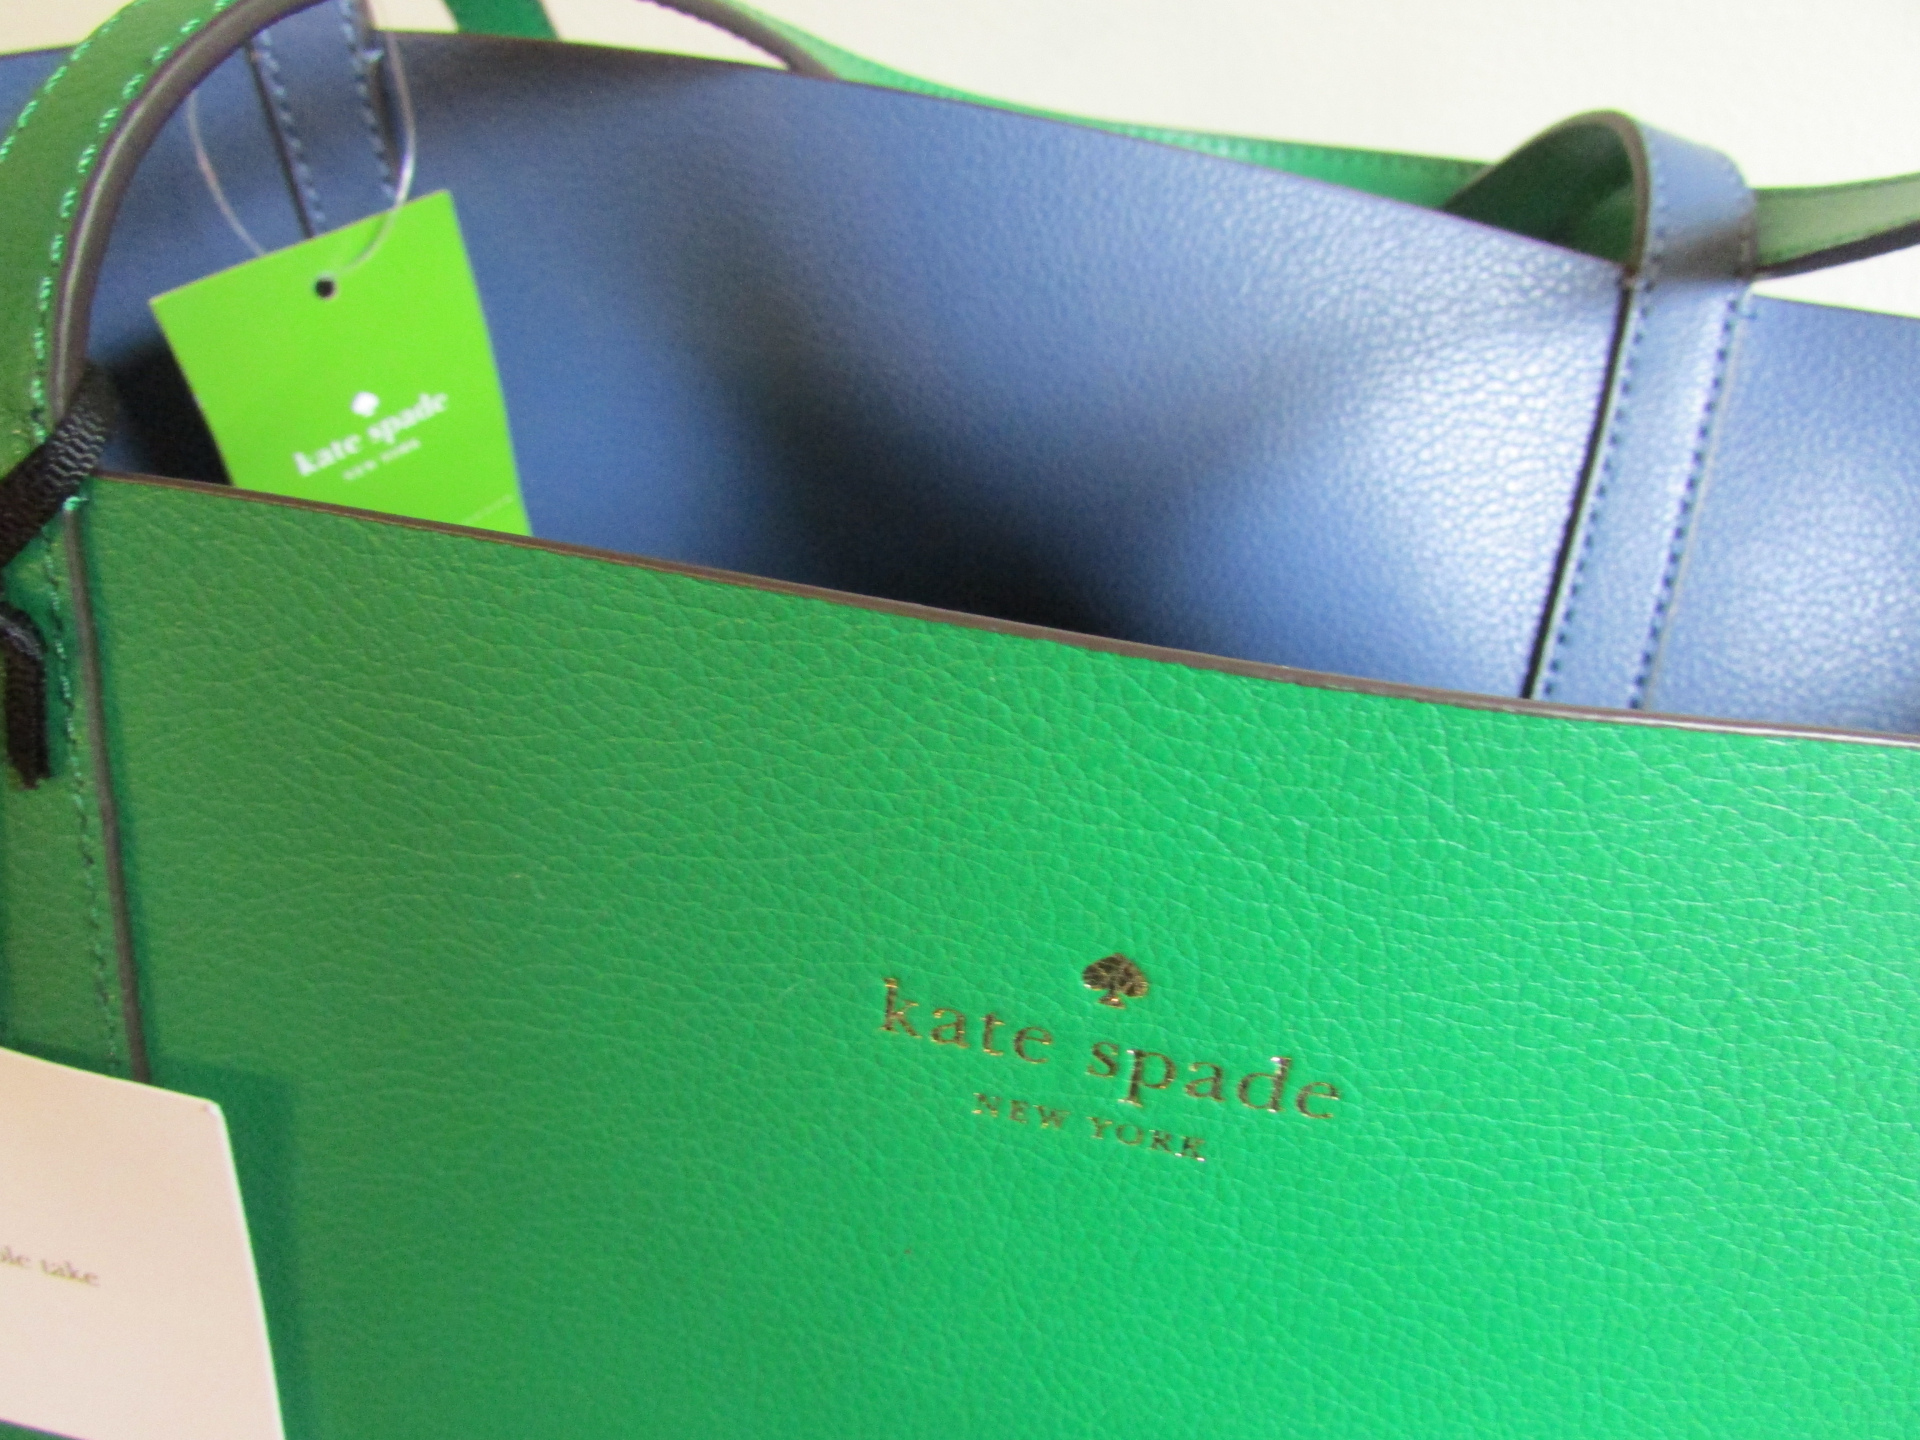 North Branch Land Trust | Item Preview: Kate Spade Tote Kelly Green & Navy